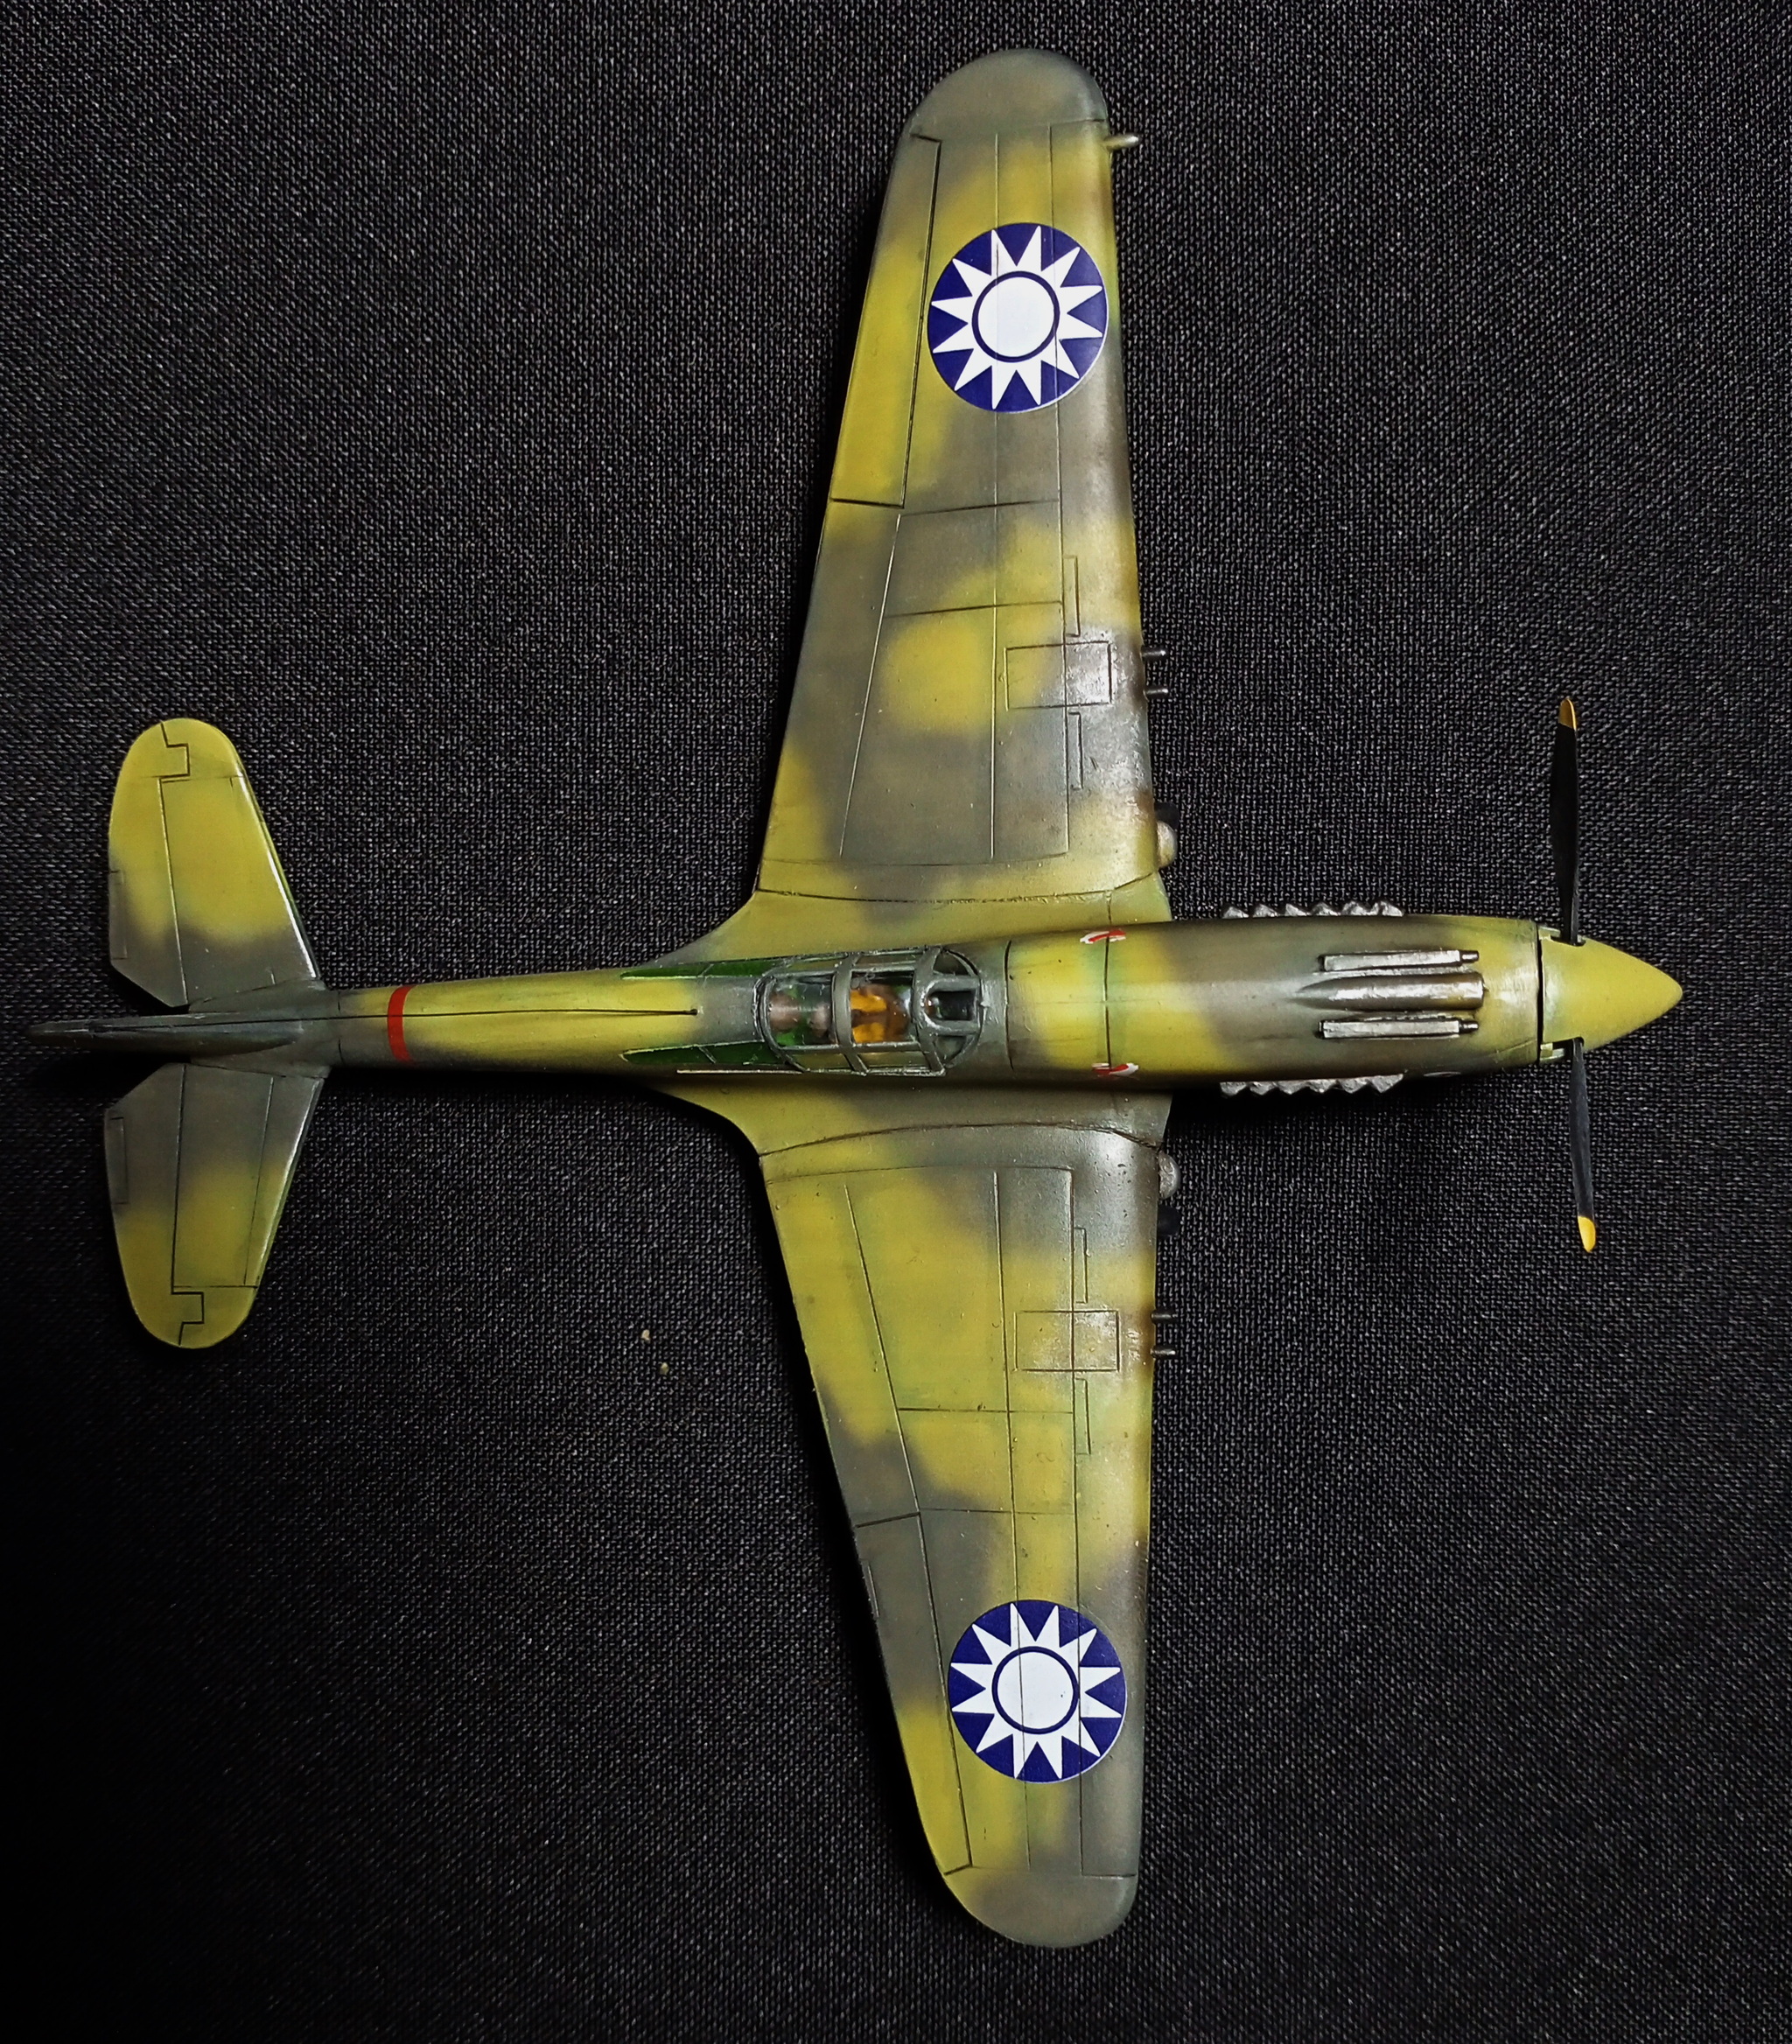 Tomahawk is flying to the rescue! - My, Modeling, Stand modeling, Prefabricated model, Aircraft modeling, Hobby, Miniature, With your own hands, Needlework without process, Aviation, Story, Airplane, The Second World War, Scale model, Collection, Collecting, USA, China, Fighter, Tomahawk, Video, Longpost